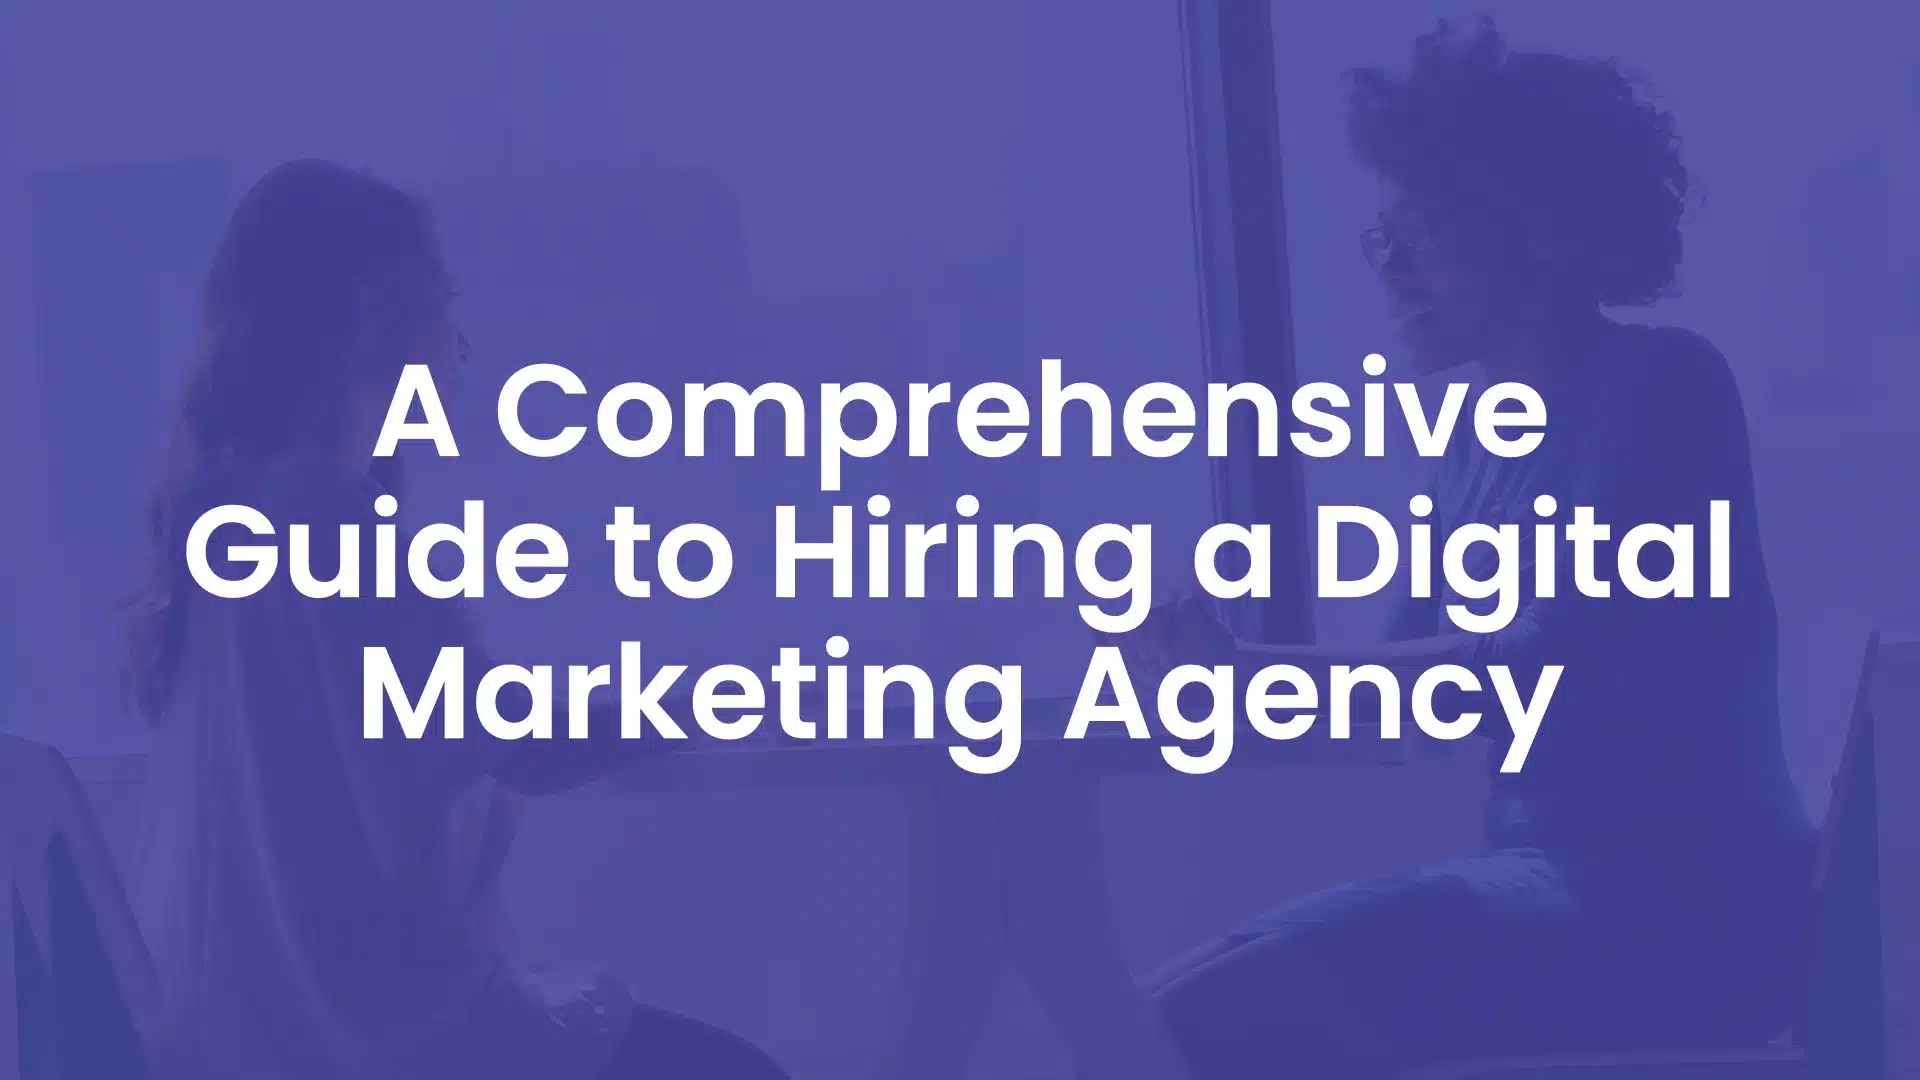 A Comprehensive Guide to Hiring a Digital Marketing Agency